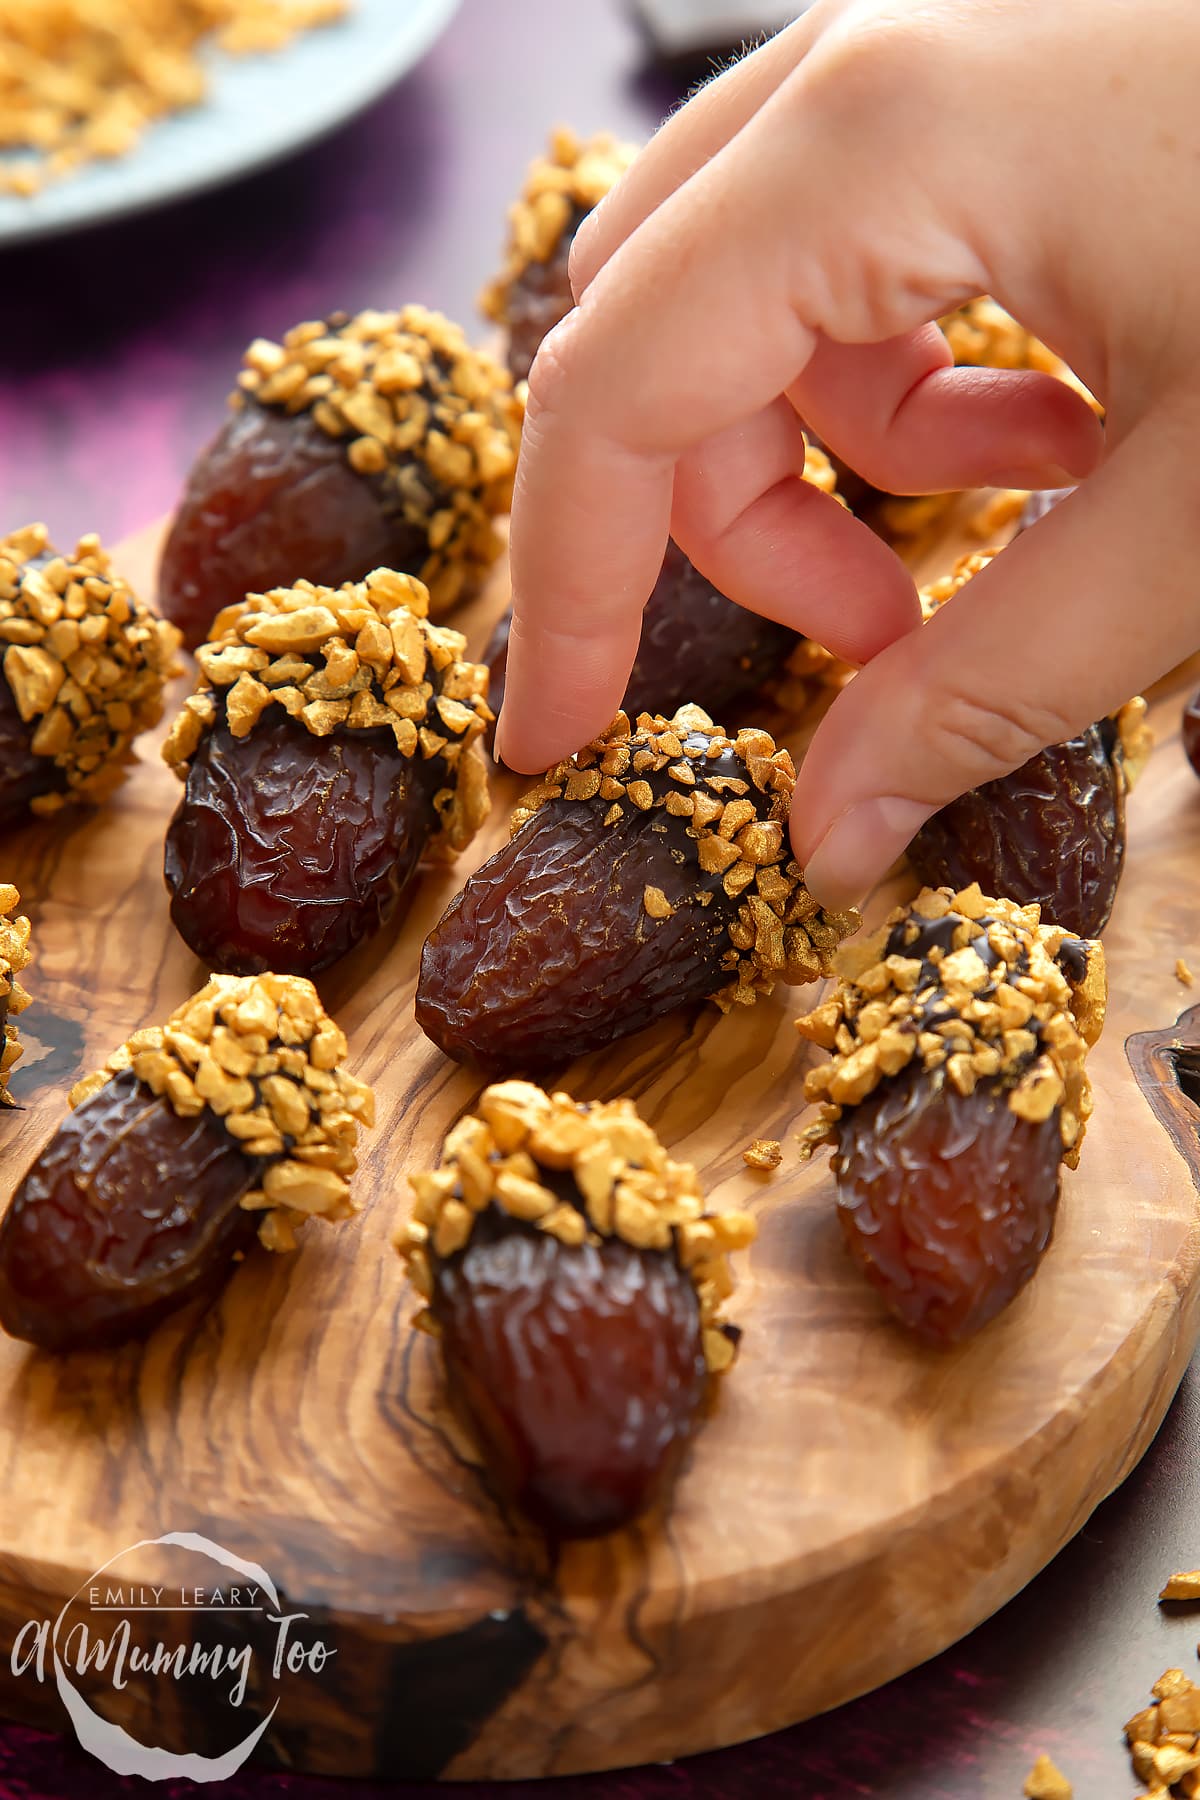 Medjool dates dipped in chocolate. The chocolate dates are on a wooden board and have be studded with gold chopped nuts. A hand reaches to take a date.